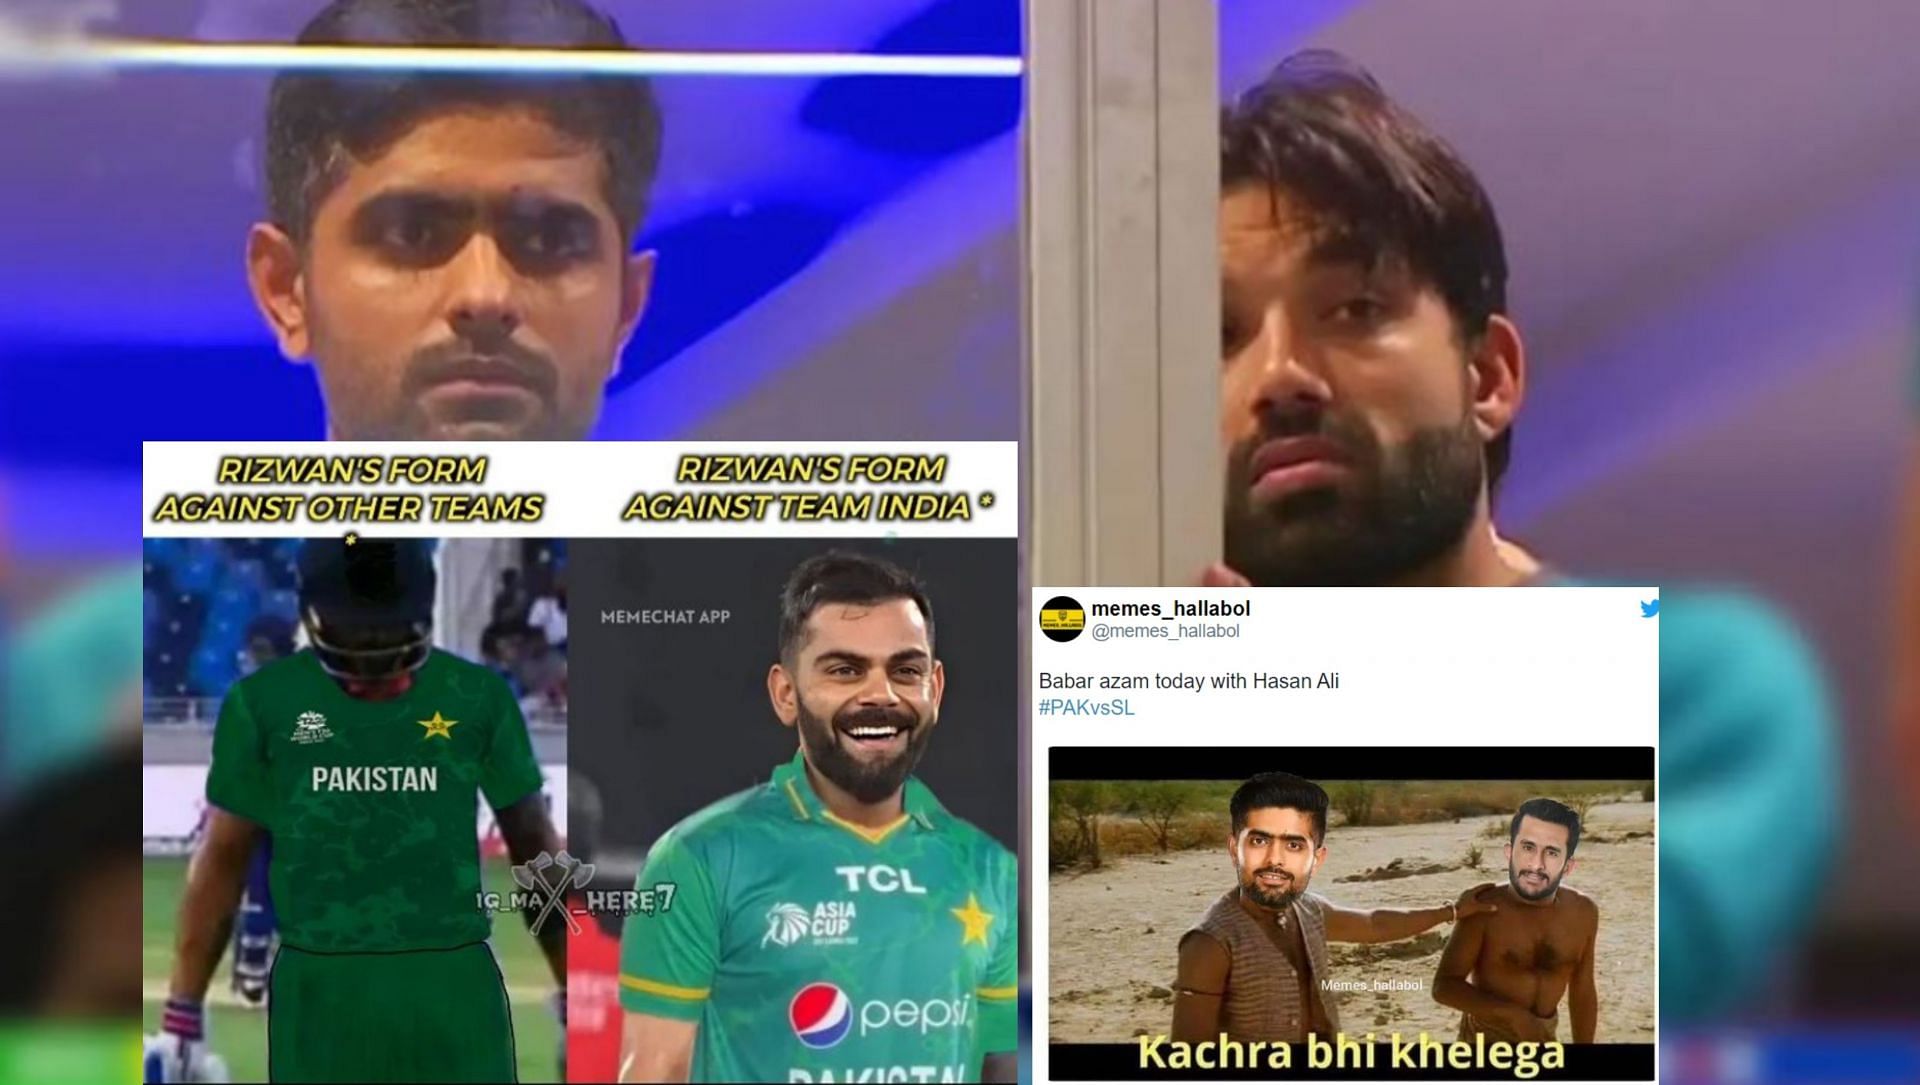 Fans took to social media to share memes after Pakistan lost against Sri Lanka